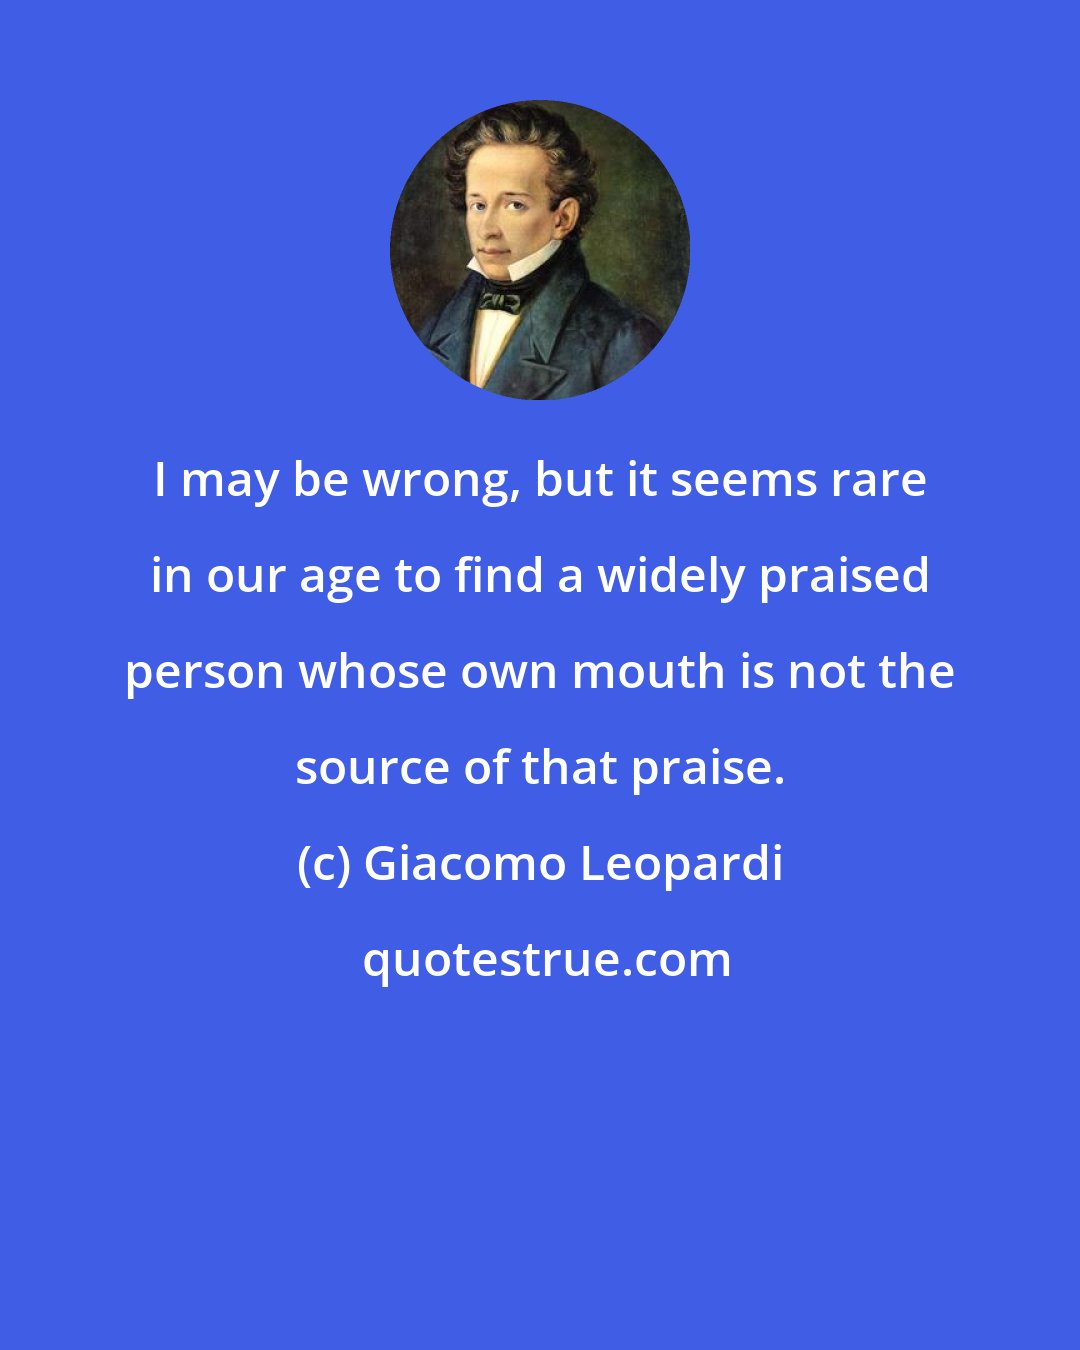 Giacomo Leopardi: I may be wrong, but it seems rare in our age to find a widely praised person whose own mouth is not the source of that praise.